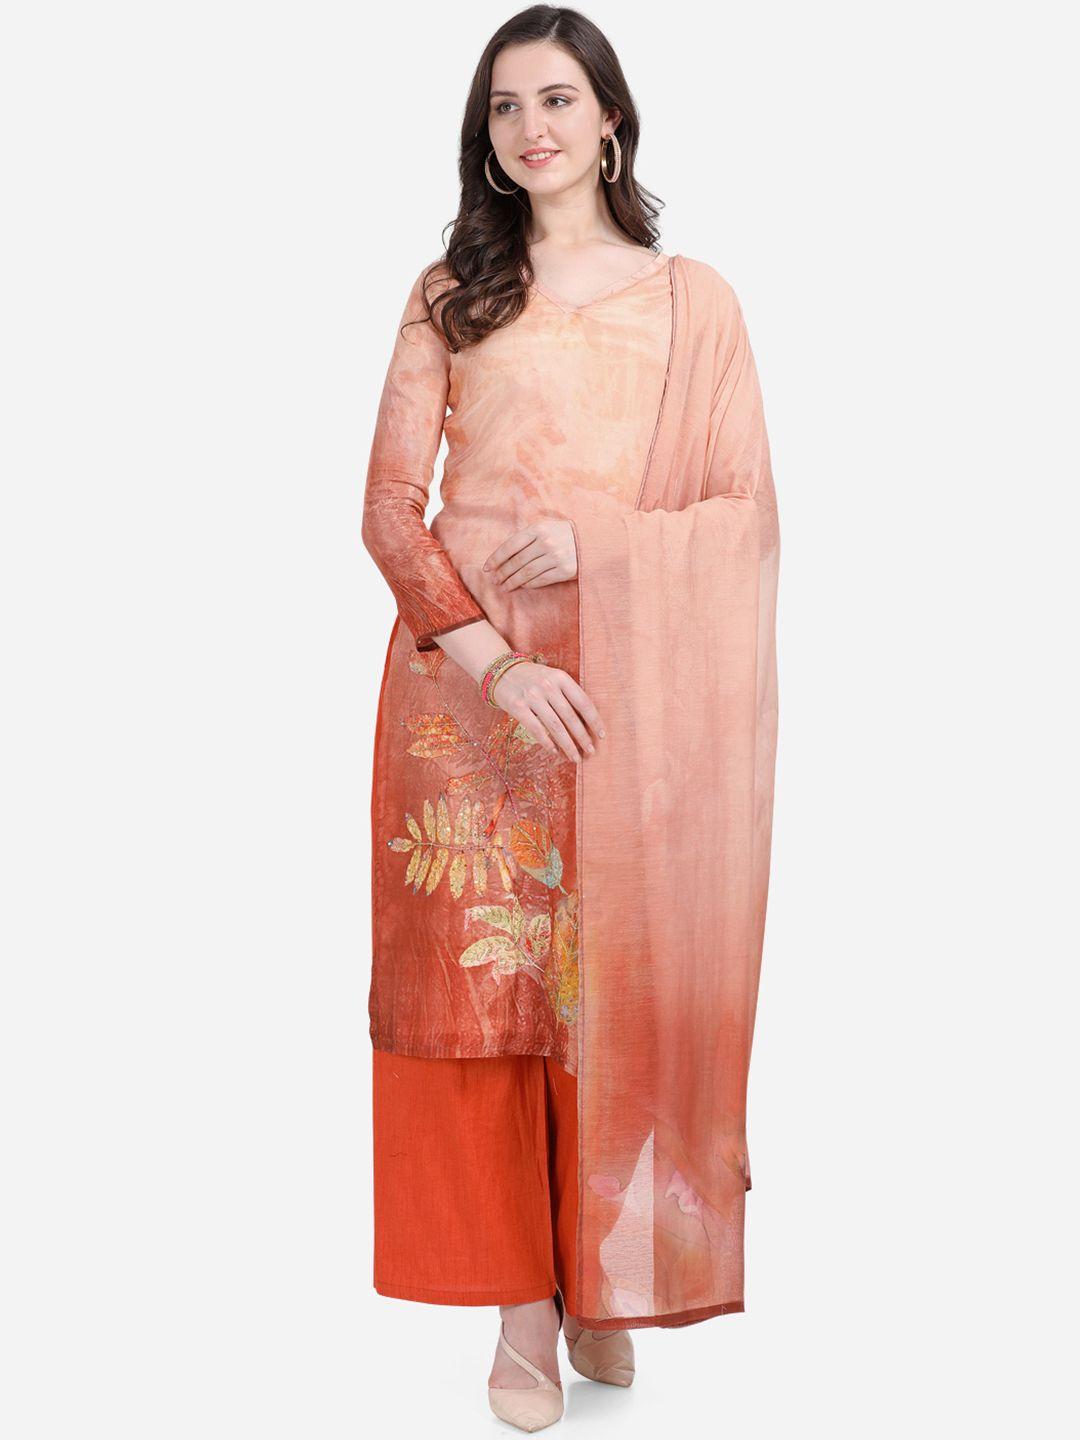 Stylee LIFESTYLE Peach-Coloured and Orange Satin Unstitched Dress Material